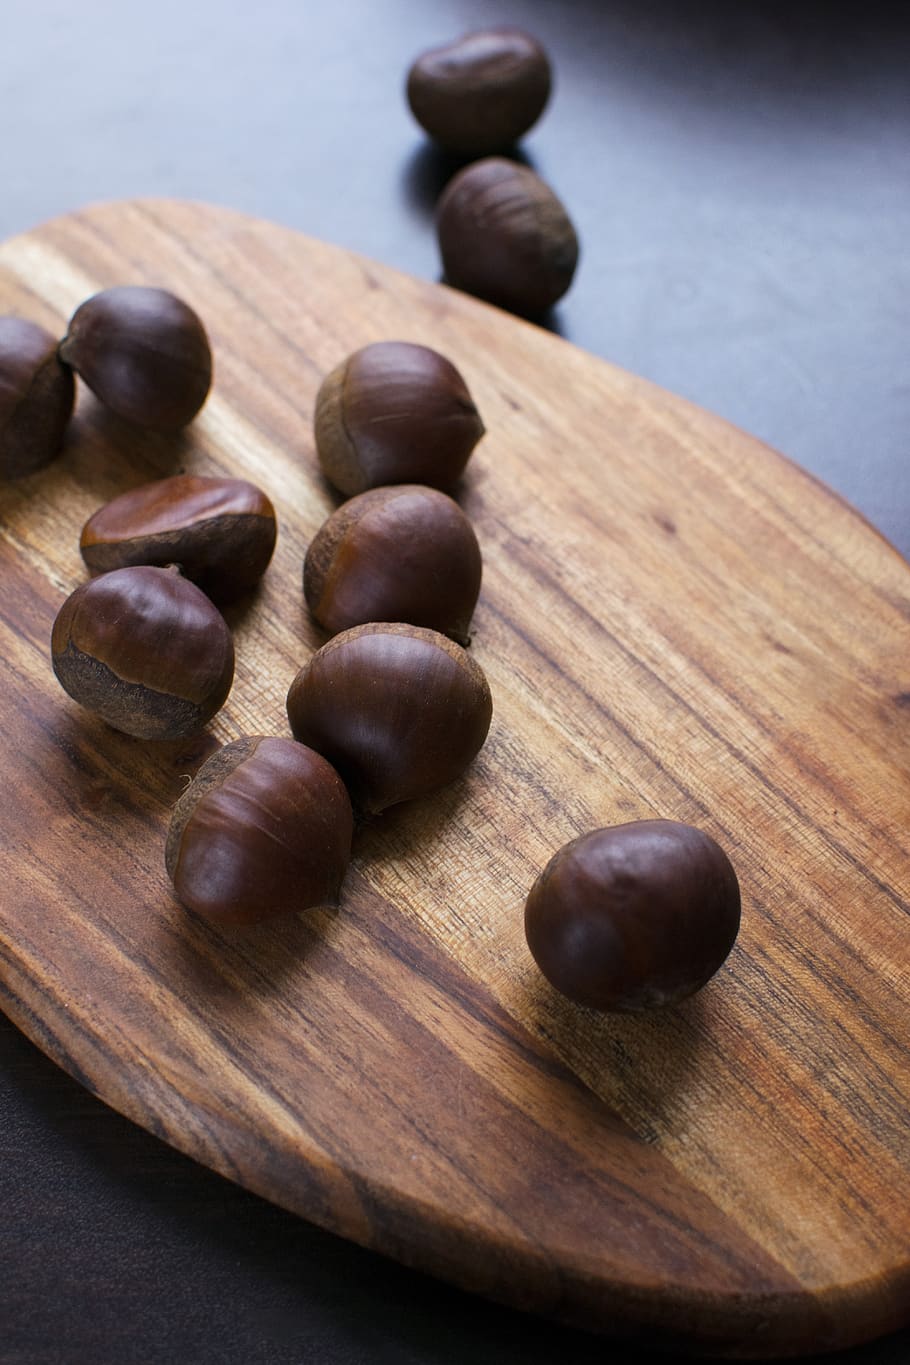 chestnuts, wooden board, food, wood - material, food and drink, table, brown, still life, high angle view, indoors